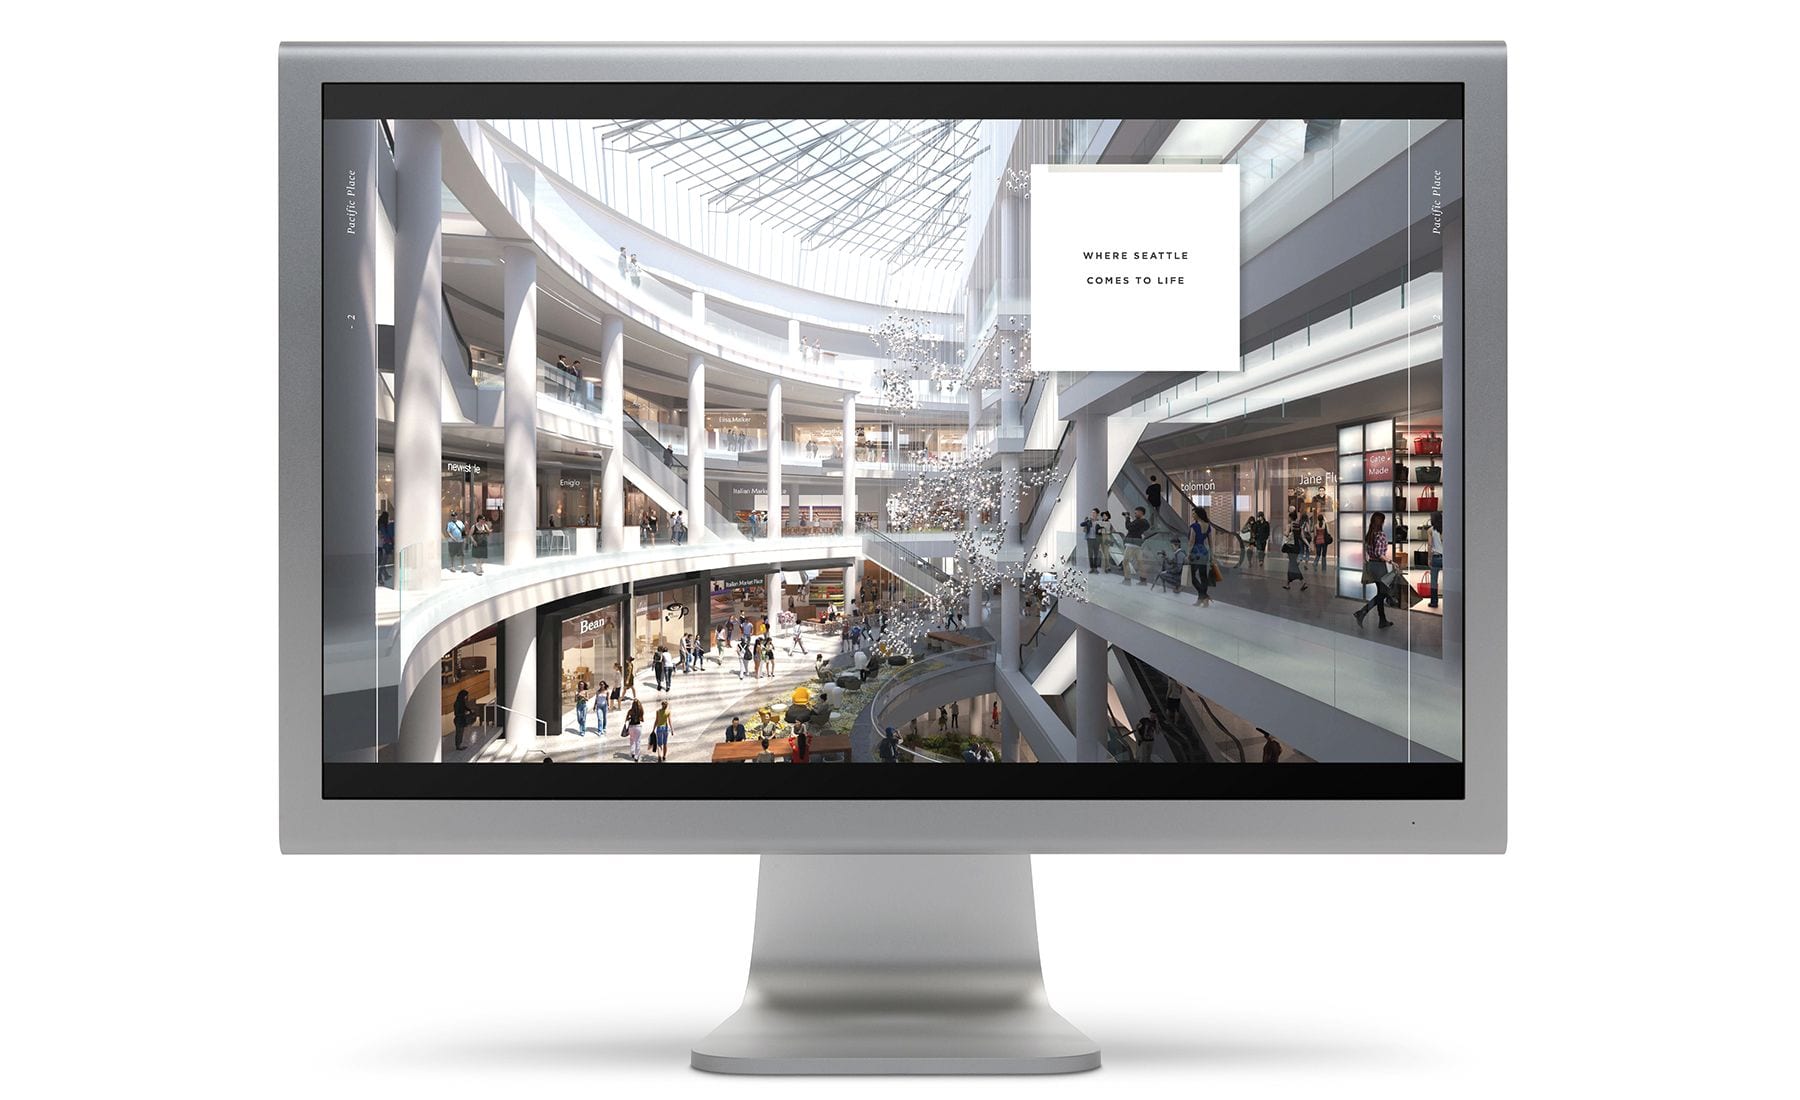 Seattle, Pacific Place, House of Current, Atlanta, Shopping Center, Retail, Fashion, Design, Creative, Advertising, Advertising Agency, Storytelling, Leasing Brochure, Digital Leasing, Digital Pamphlet